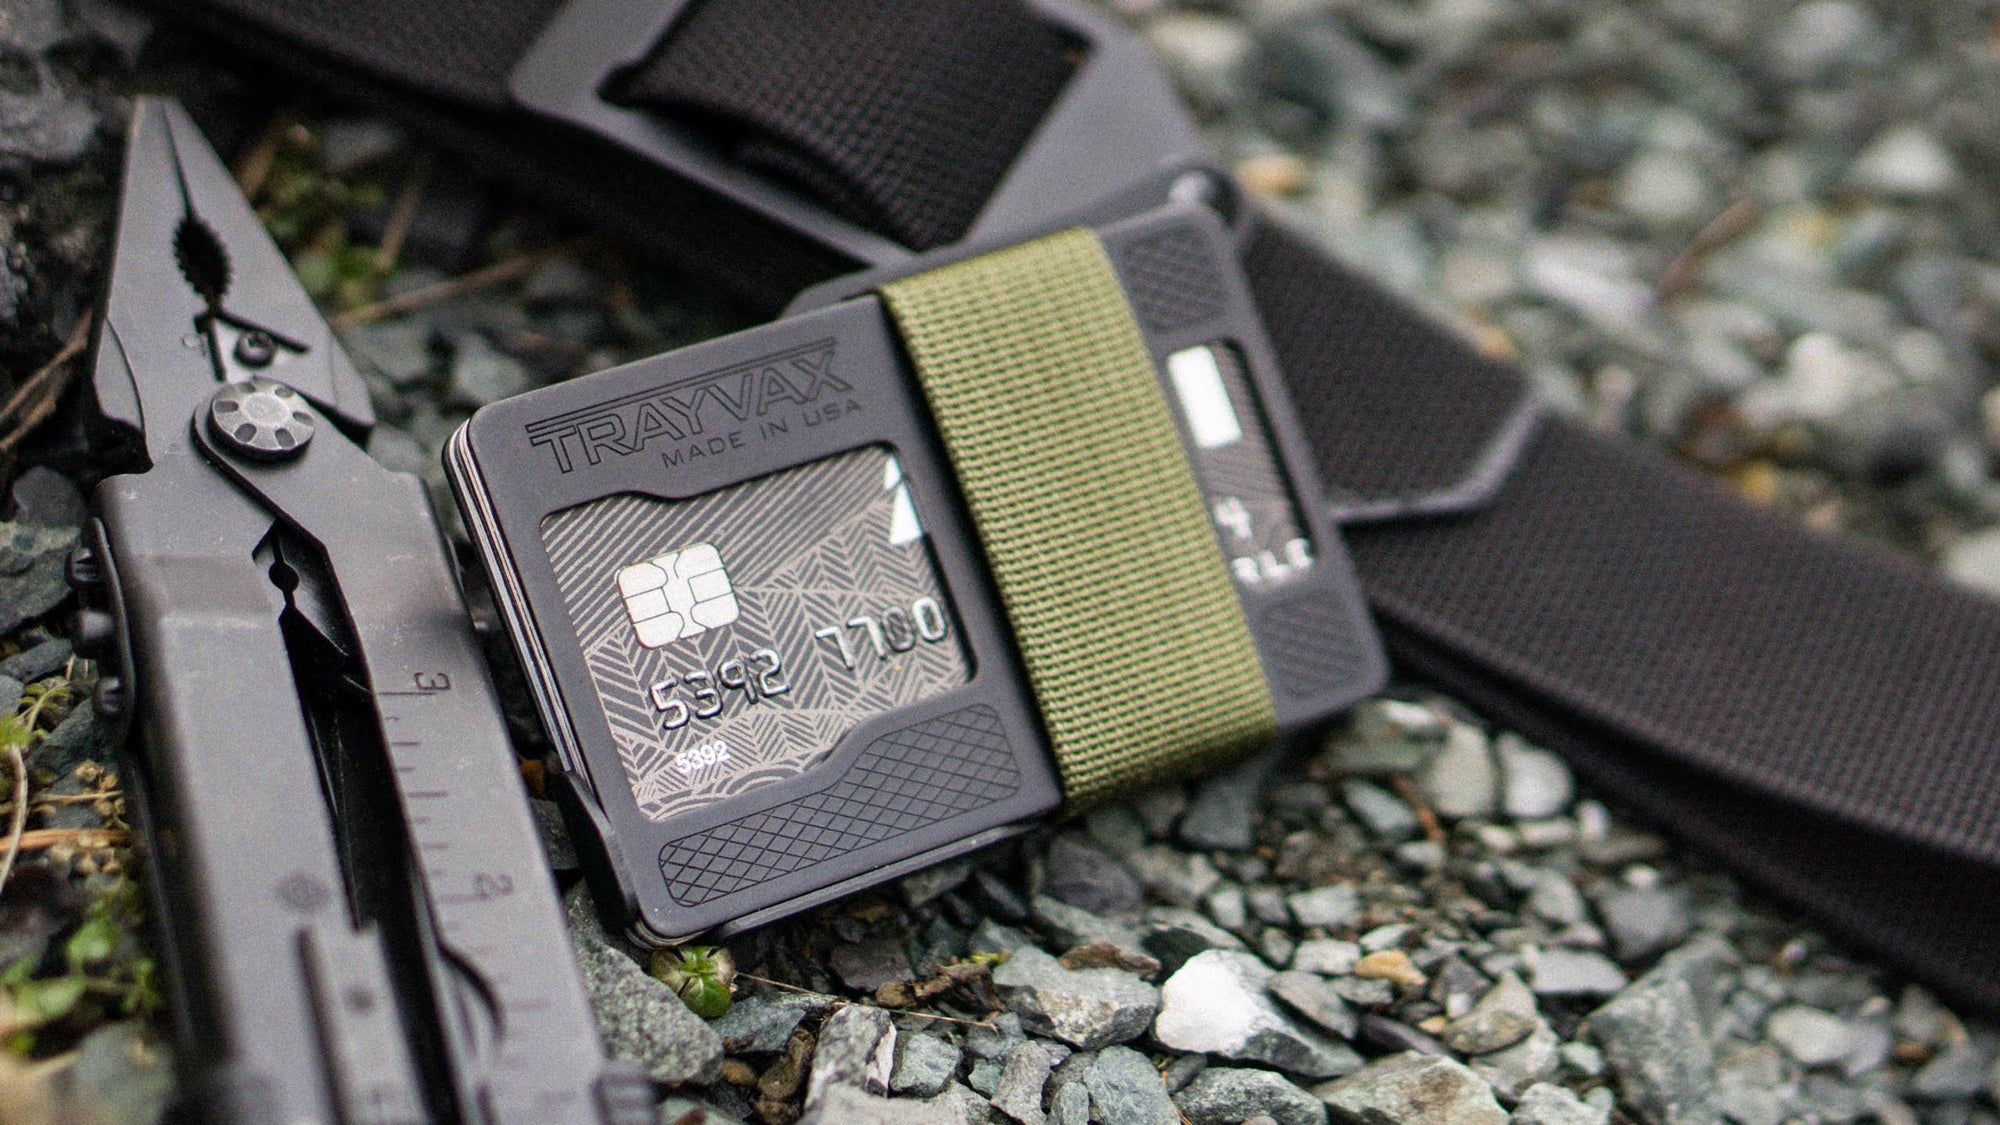 Armored Summit Wallet With OD Green Cinch Strap Laying on Rocks, Propped Up Agains Black Cinch Belt